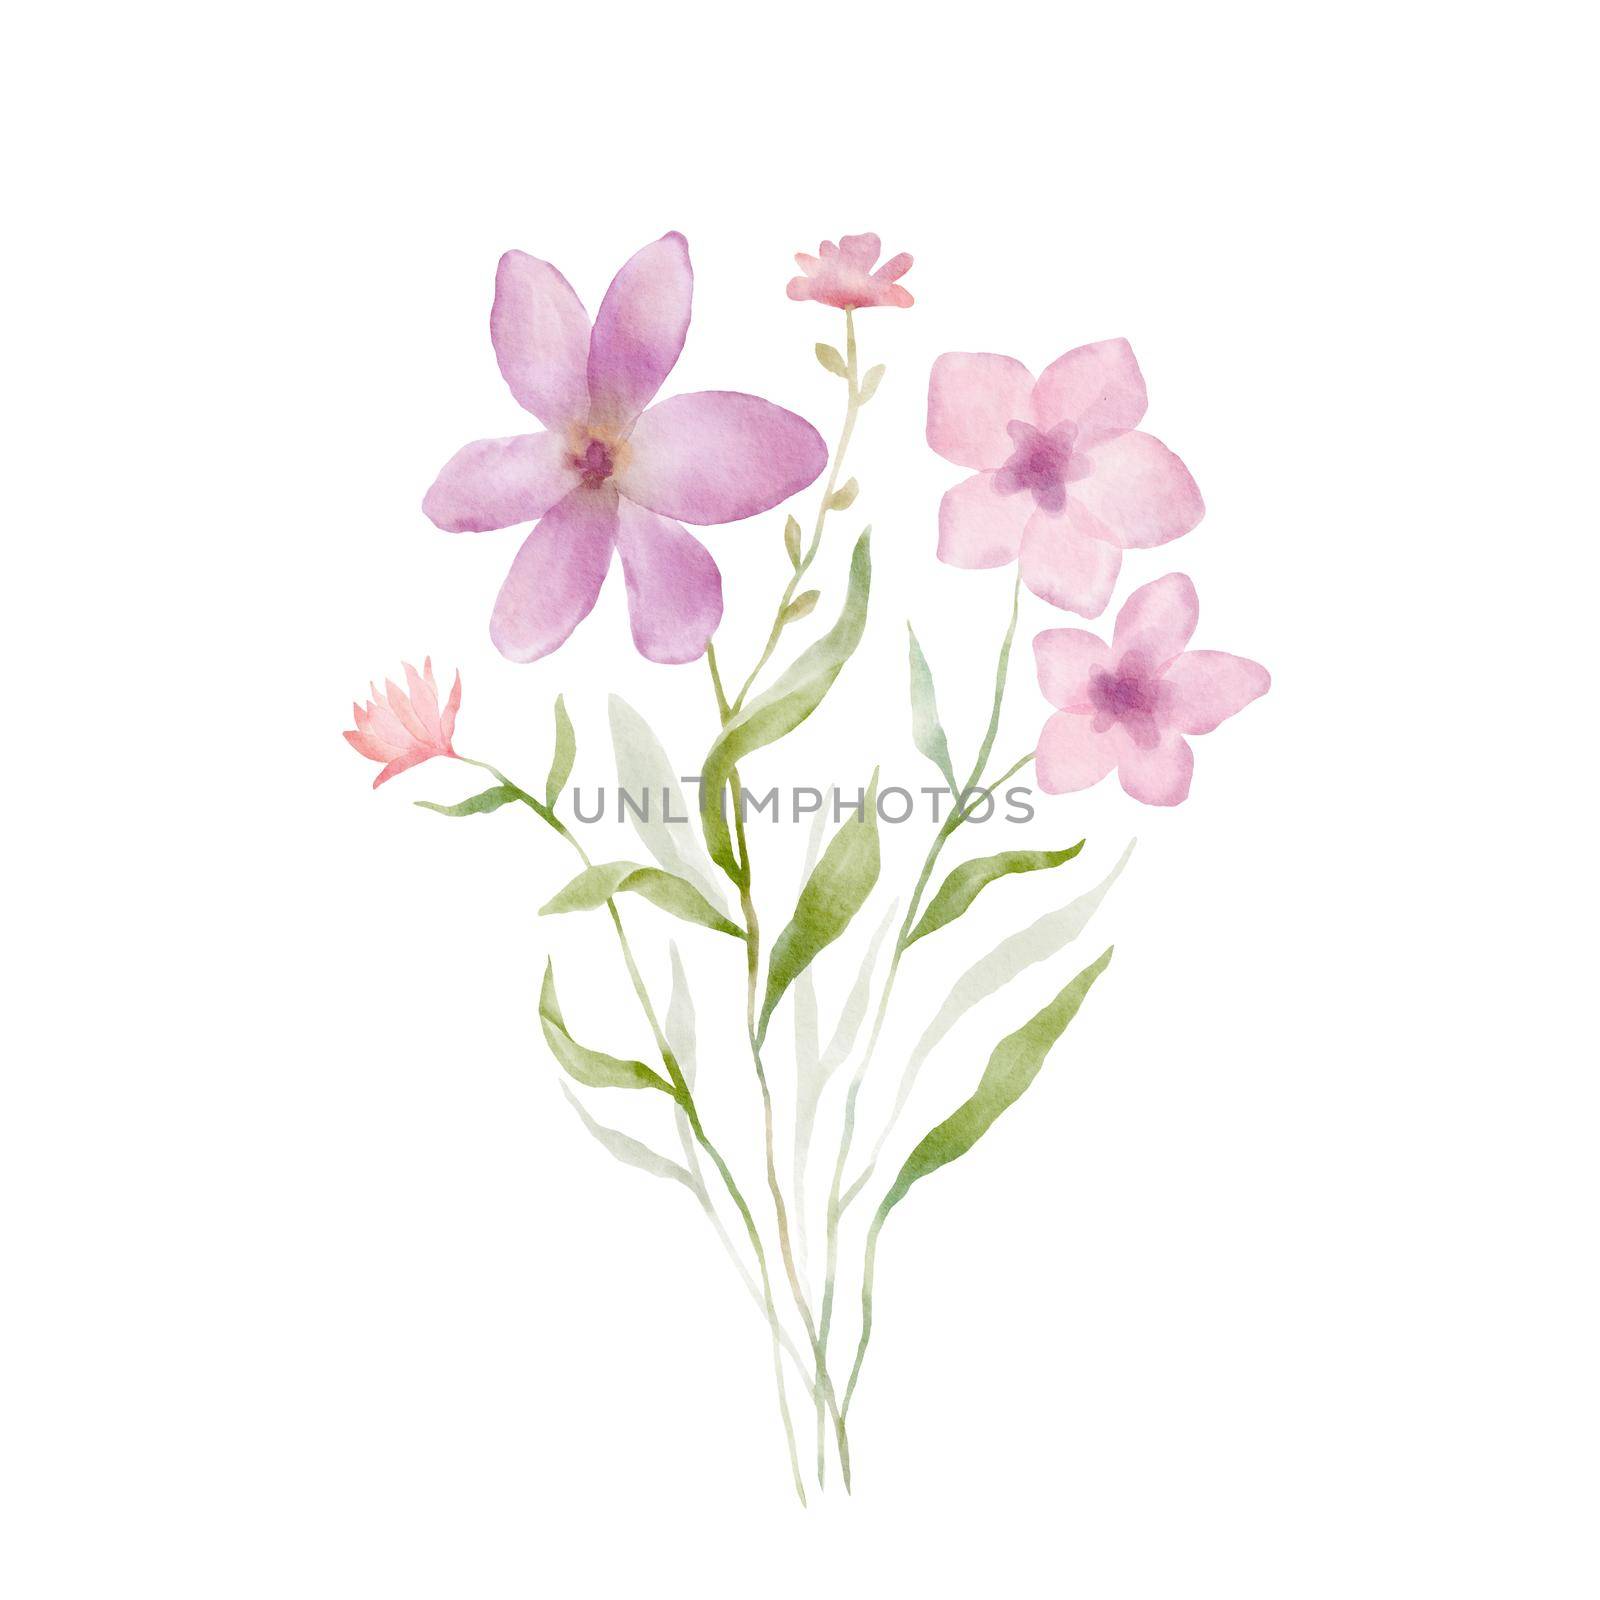 Watercolor pink flowers. Illustration of bouquet of wildflowers